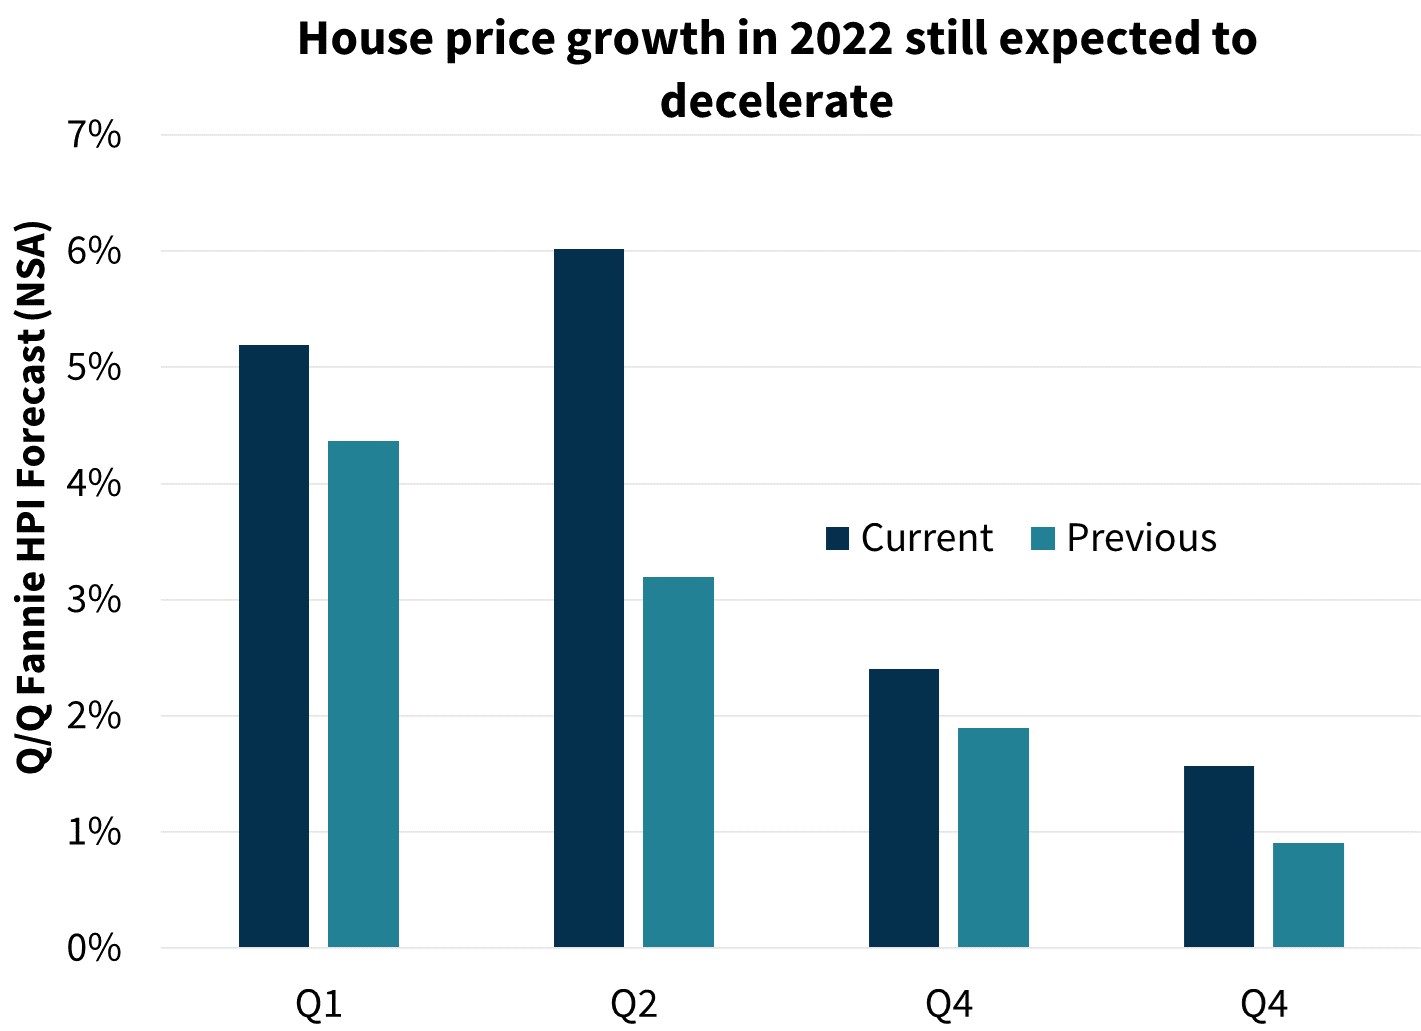 House price growth in 2022 still expected to decelerate